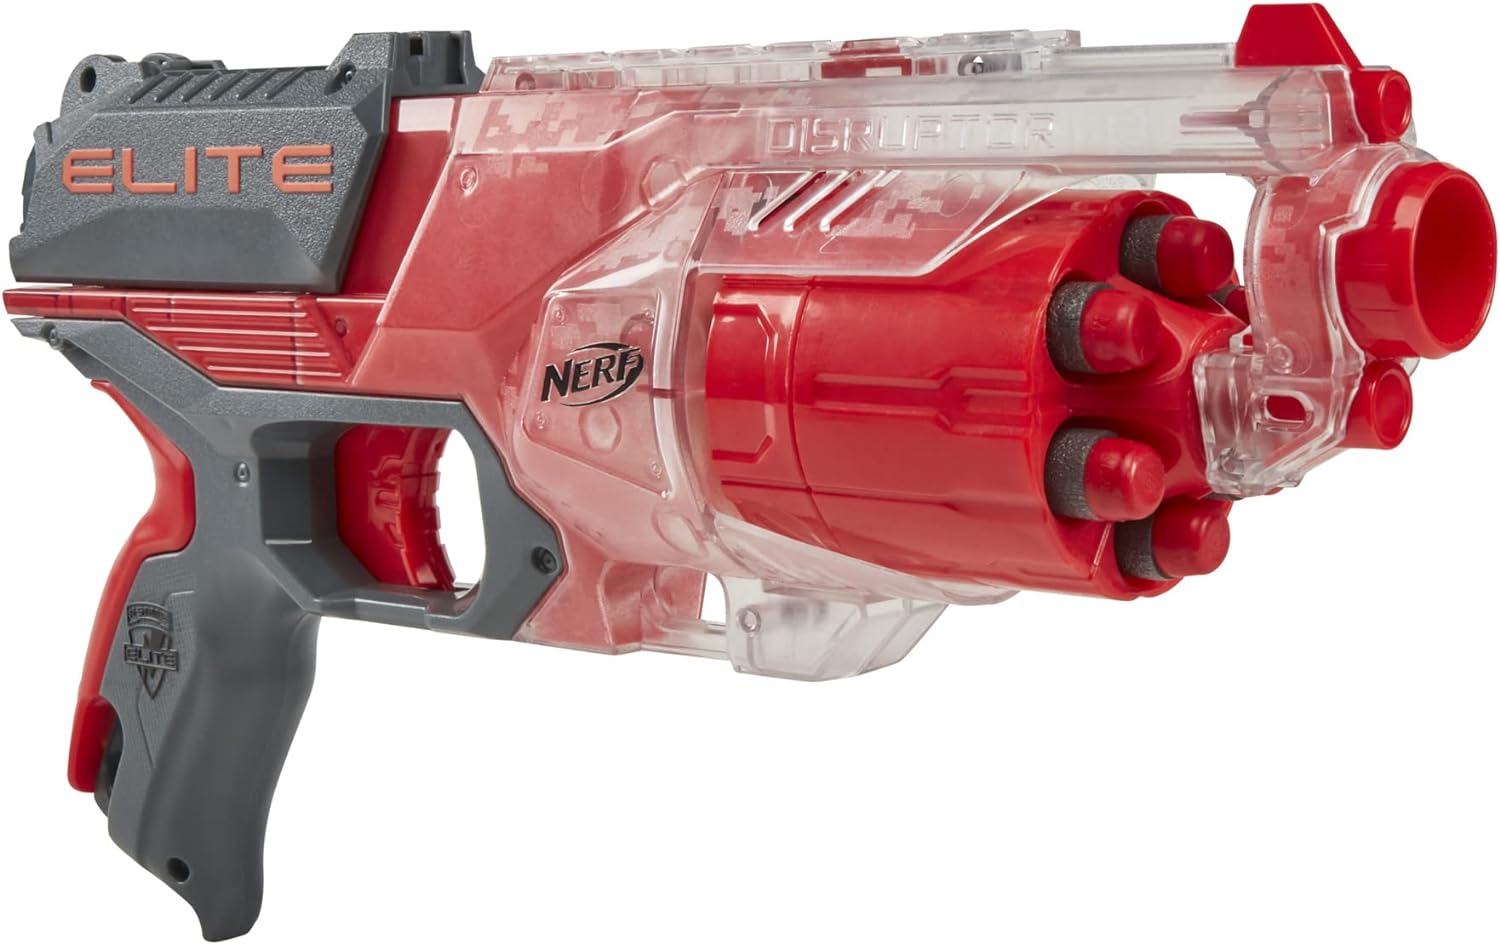 I bought 3 of these in 3 different colors for the impending 2023 Holiday Nerf War. They were all a great buy at around $9.99 USD a piece.The open front design makes it much easier to reload the drum than some others. Accuracy is what you'd expect from a pistol Nerf blaster. The 